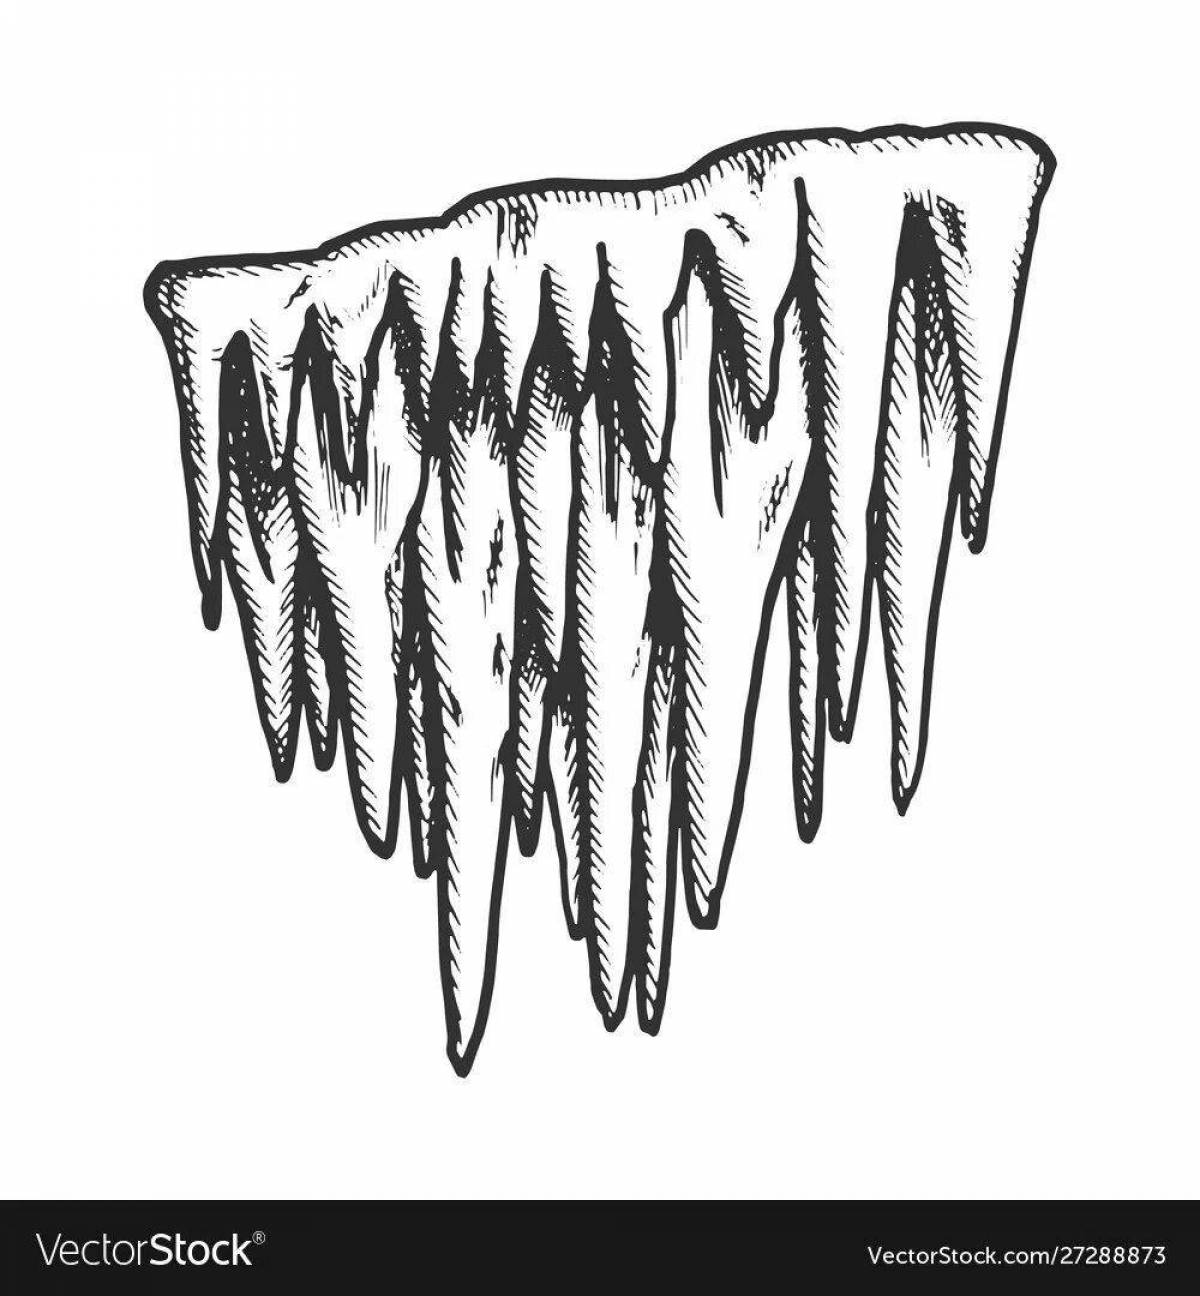 Awesome icicle coloring pages for kids